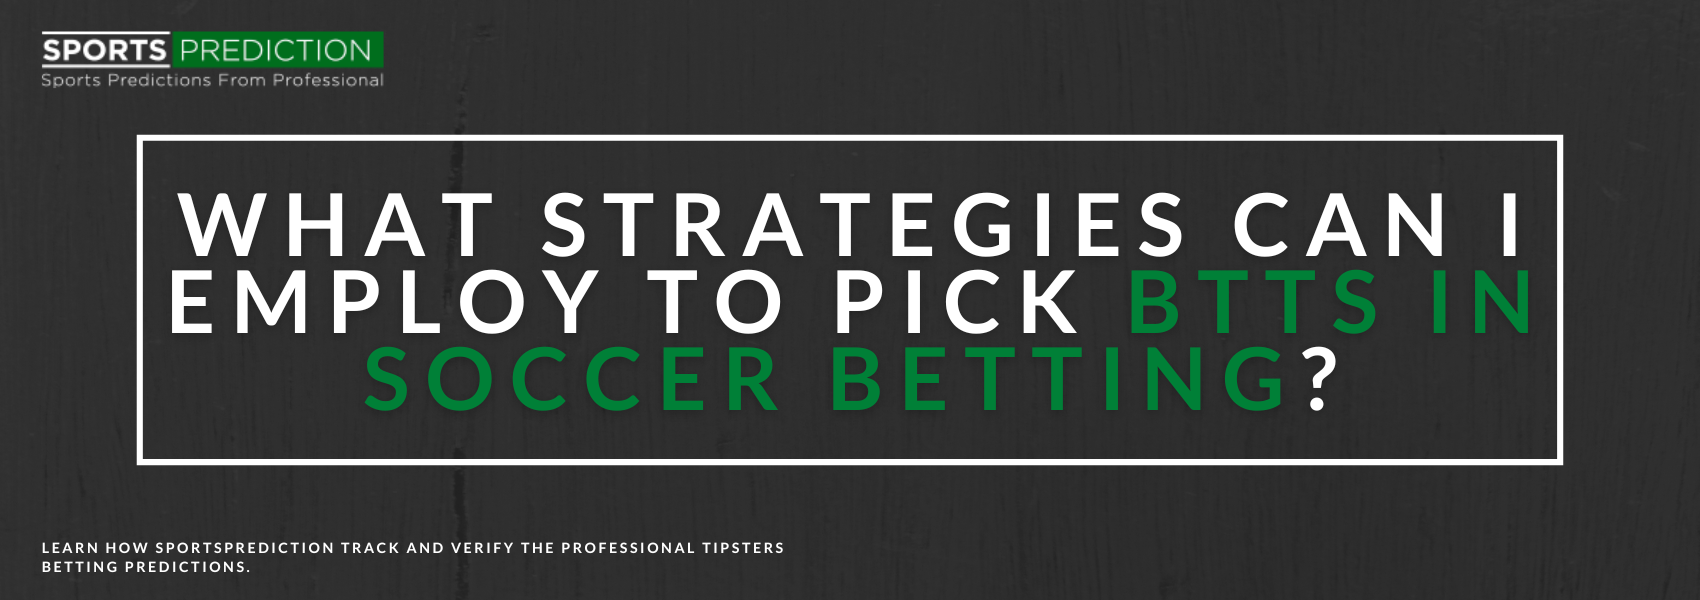 What Strategies Can I Employ To Pick BTTS In Soccer Betting?